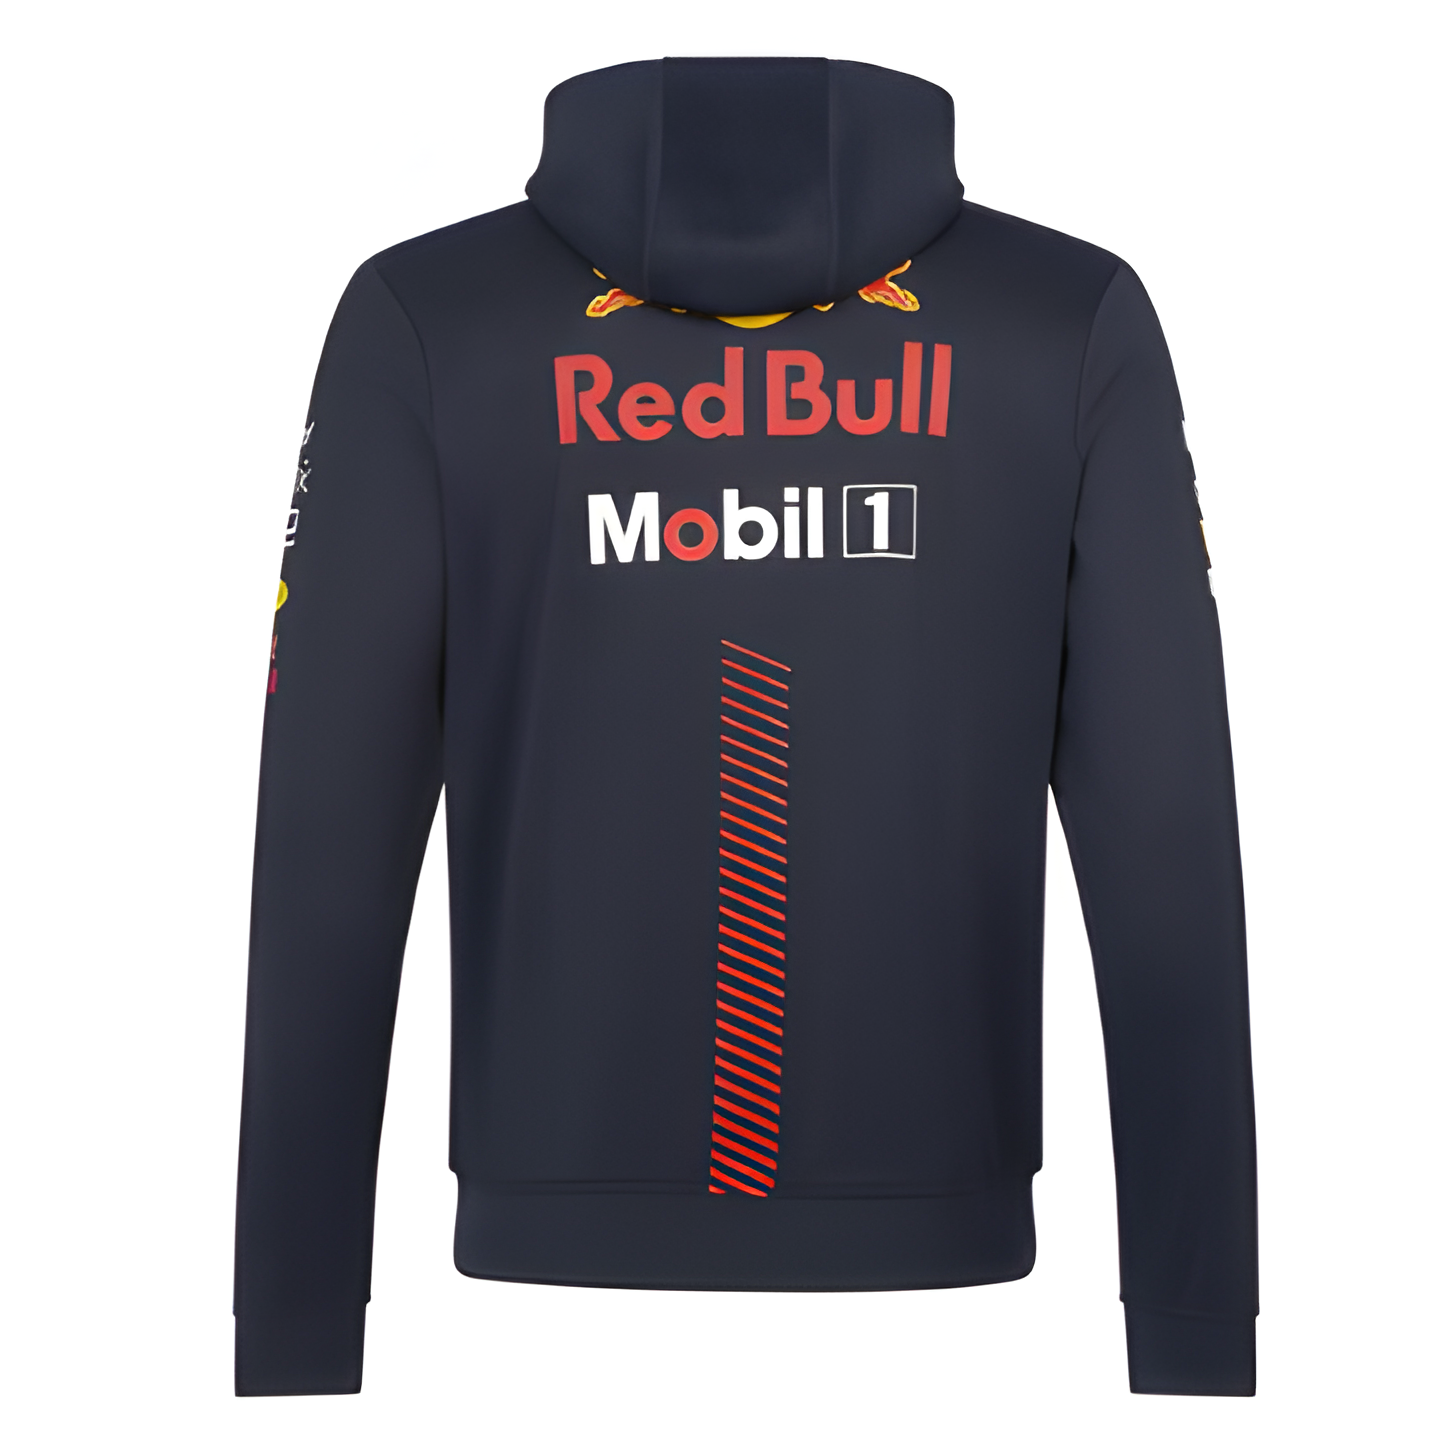 Red Bull Racing mens Hoodie, Take a lot apparel, Formula one apparel, Hoodie, Jersey, clothing brand, take a lot, jersey, f1 hoodie, f1 clothes, best seller, mens clothes, winter wear, fanware, fanwear, red bull hoodie